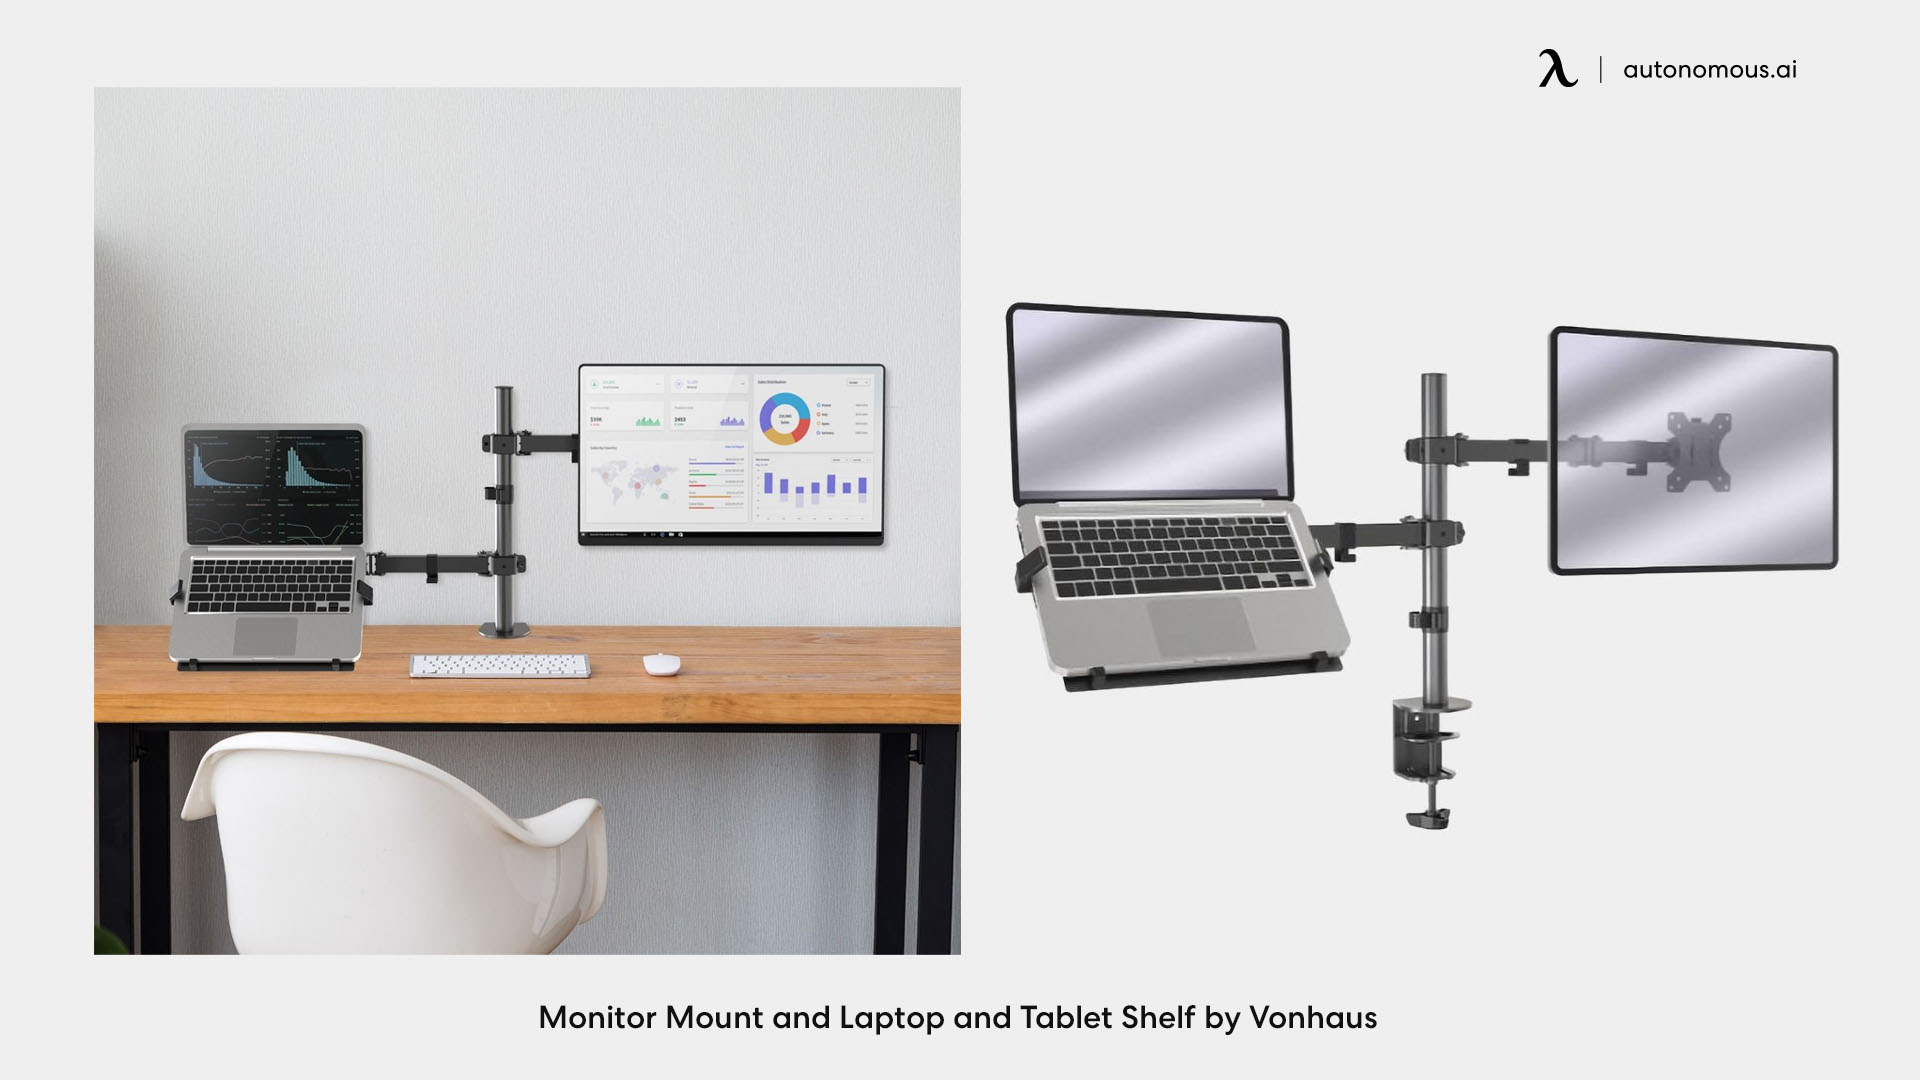 Monitor Mount and Laptop and Tablet Shelf by Vonhaus